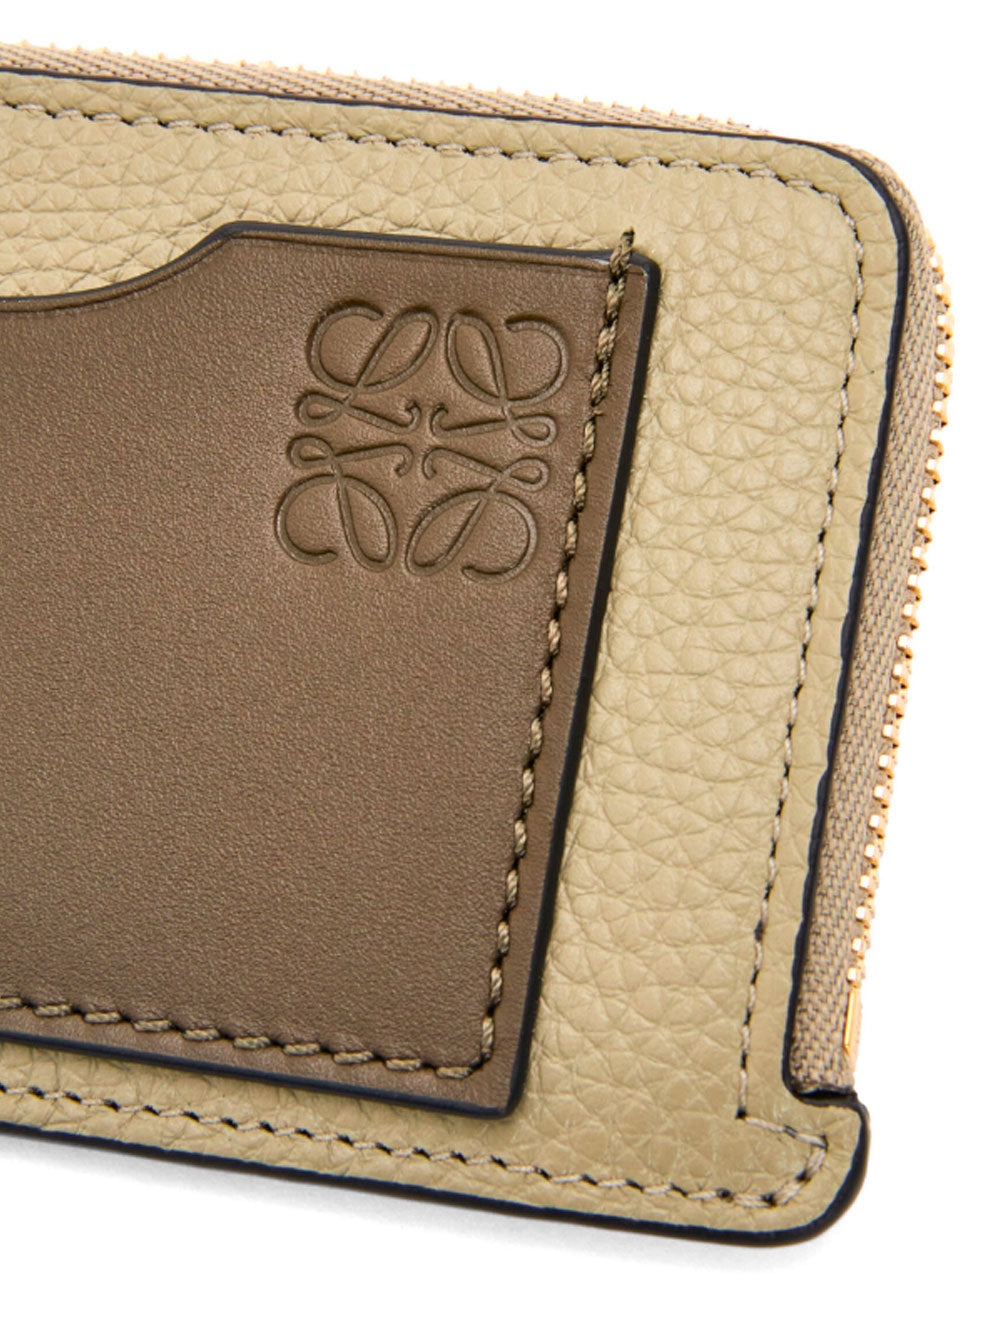 Cardholder in soft grained leather